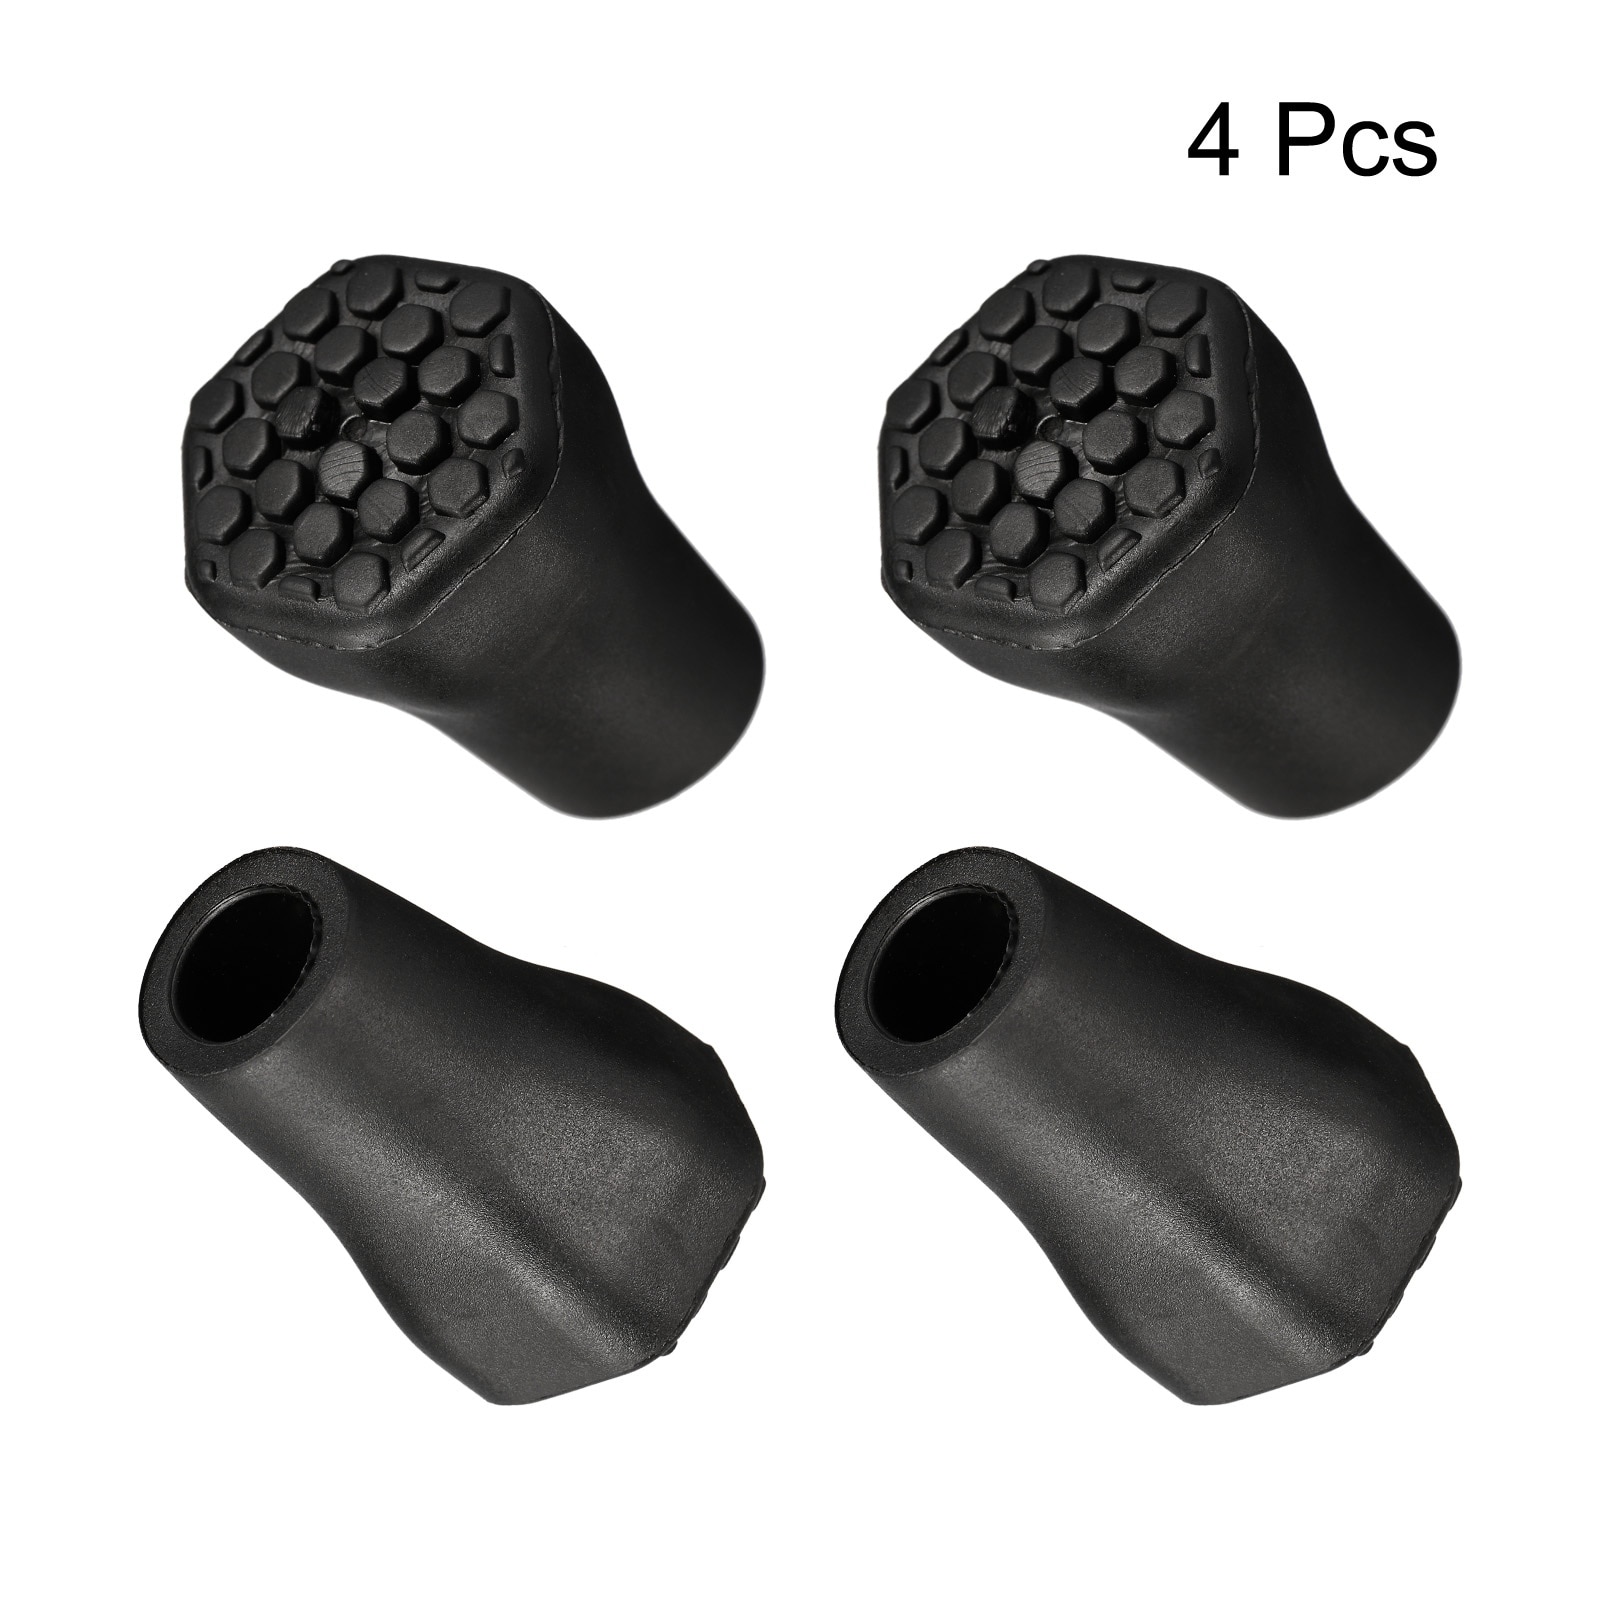 https://ak1.ostkcdn.com/images/products/is/images/direct/74cce21c18c4c7cef7931c9a5baec6e0ede76910/4Pcs-Trekking-Pole-Tips-Climbing-Ski-Cane-Tip-Protectors-Replacement-Accessories.jpg